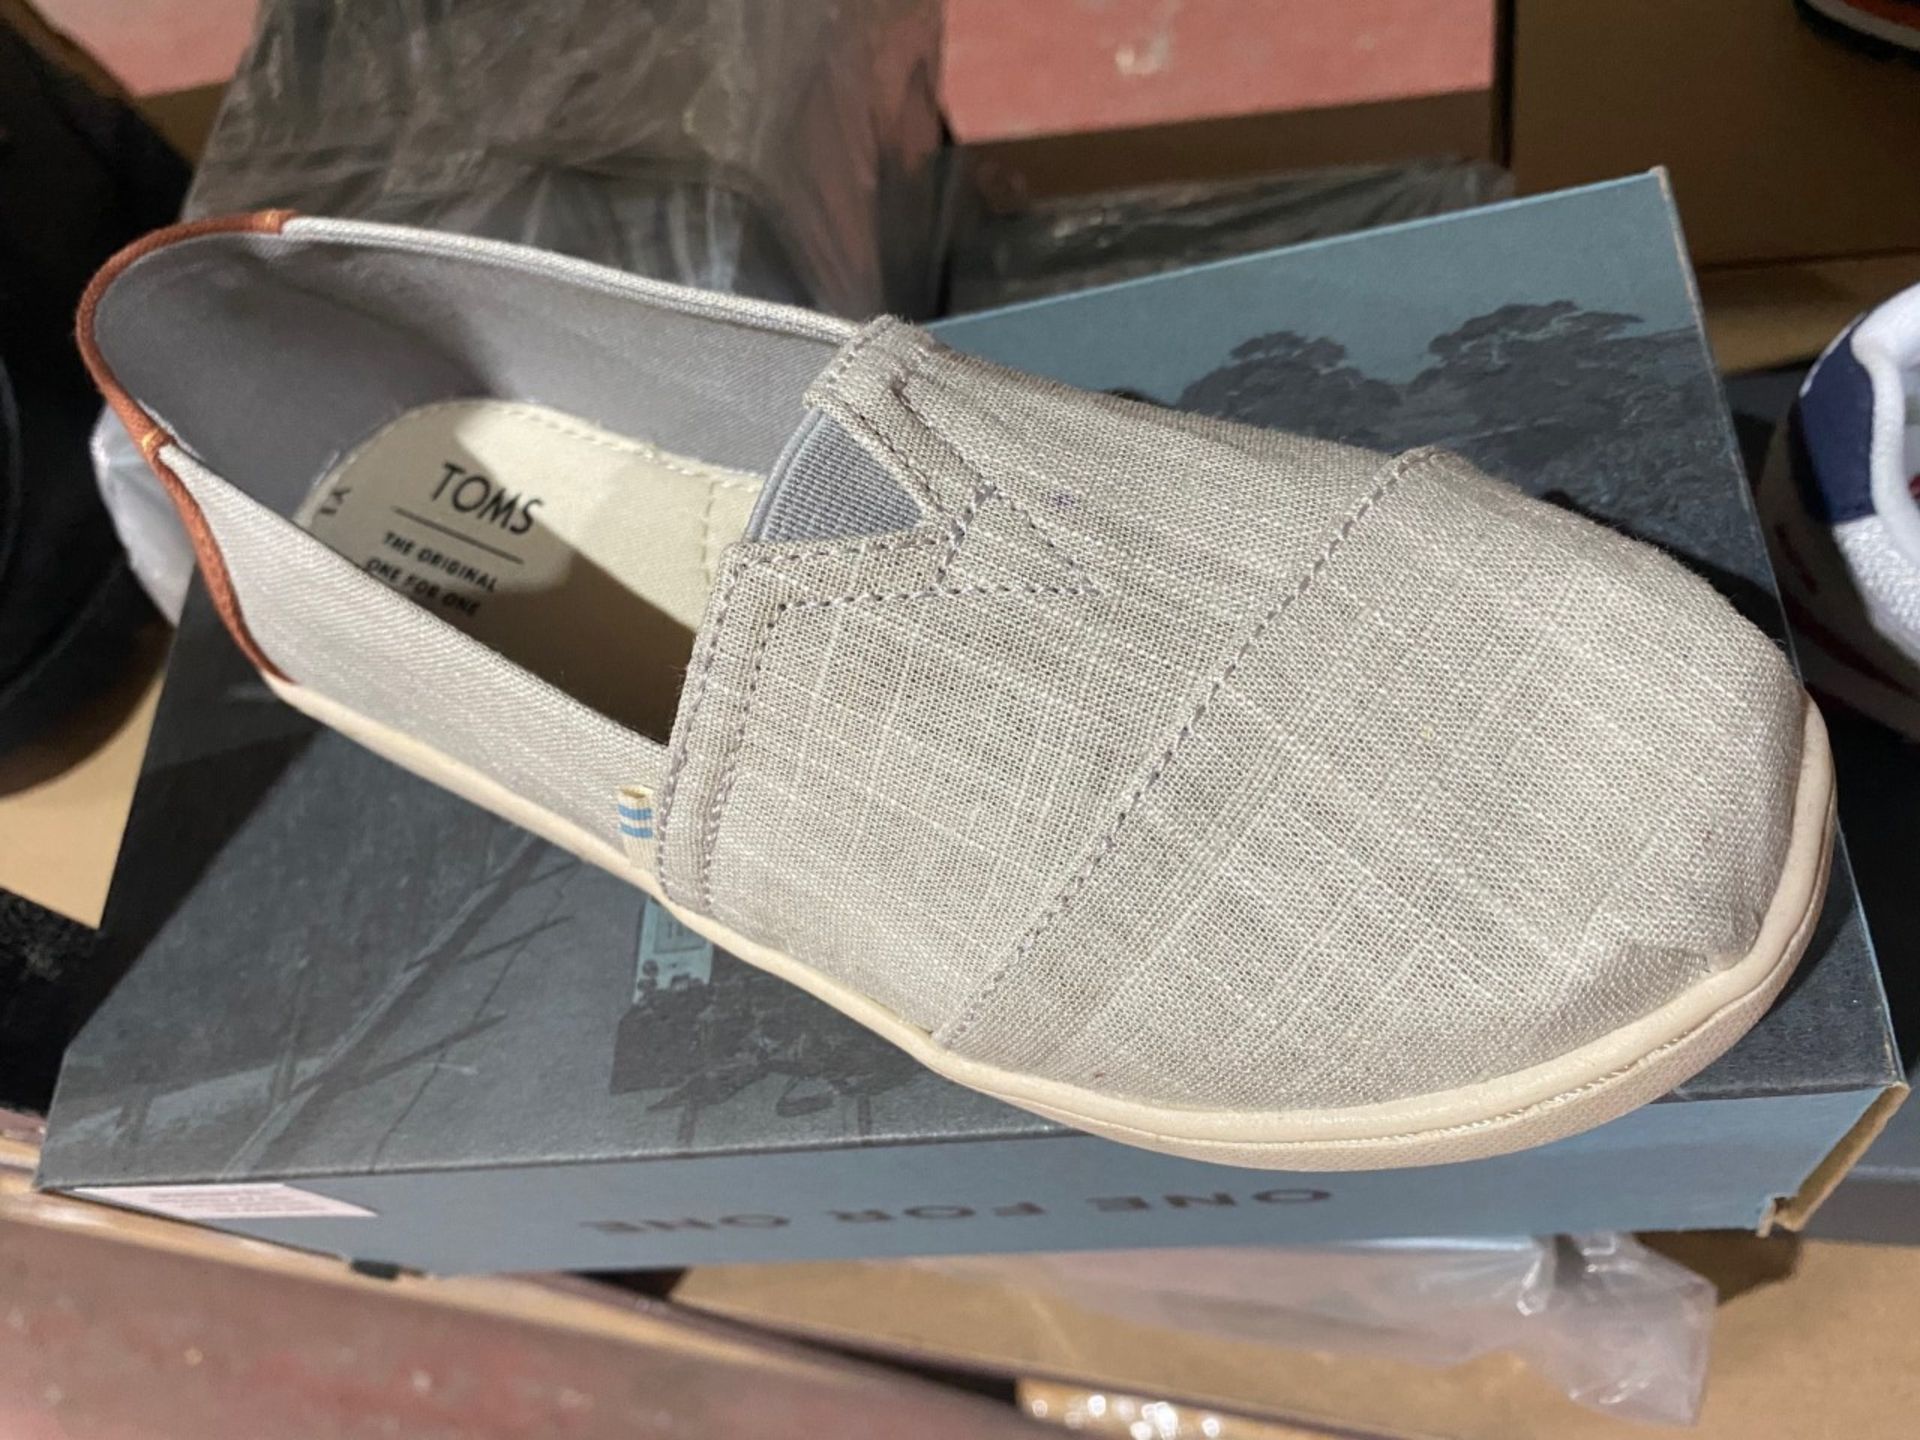 NEW & BOXED TOMS GREY SHOE SIZE INFANT 13 (35/14) - Image 2 of 2